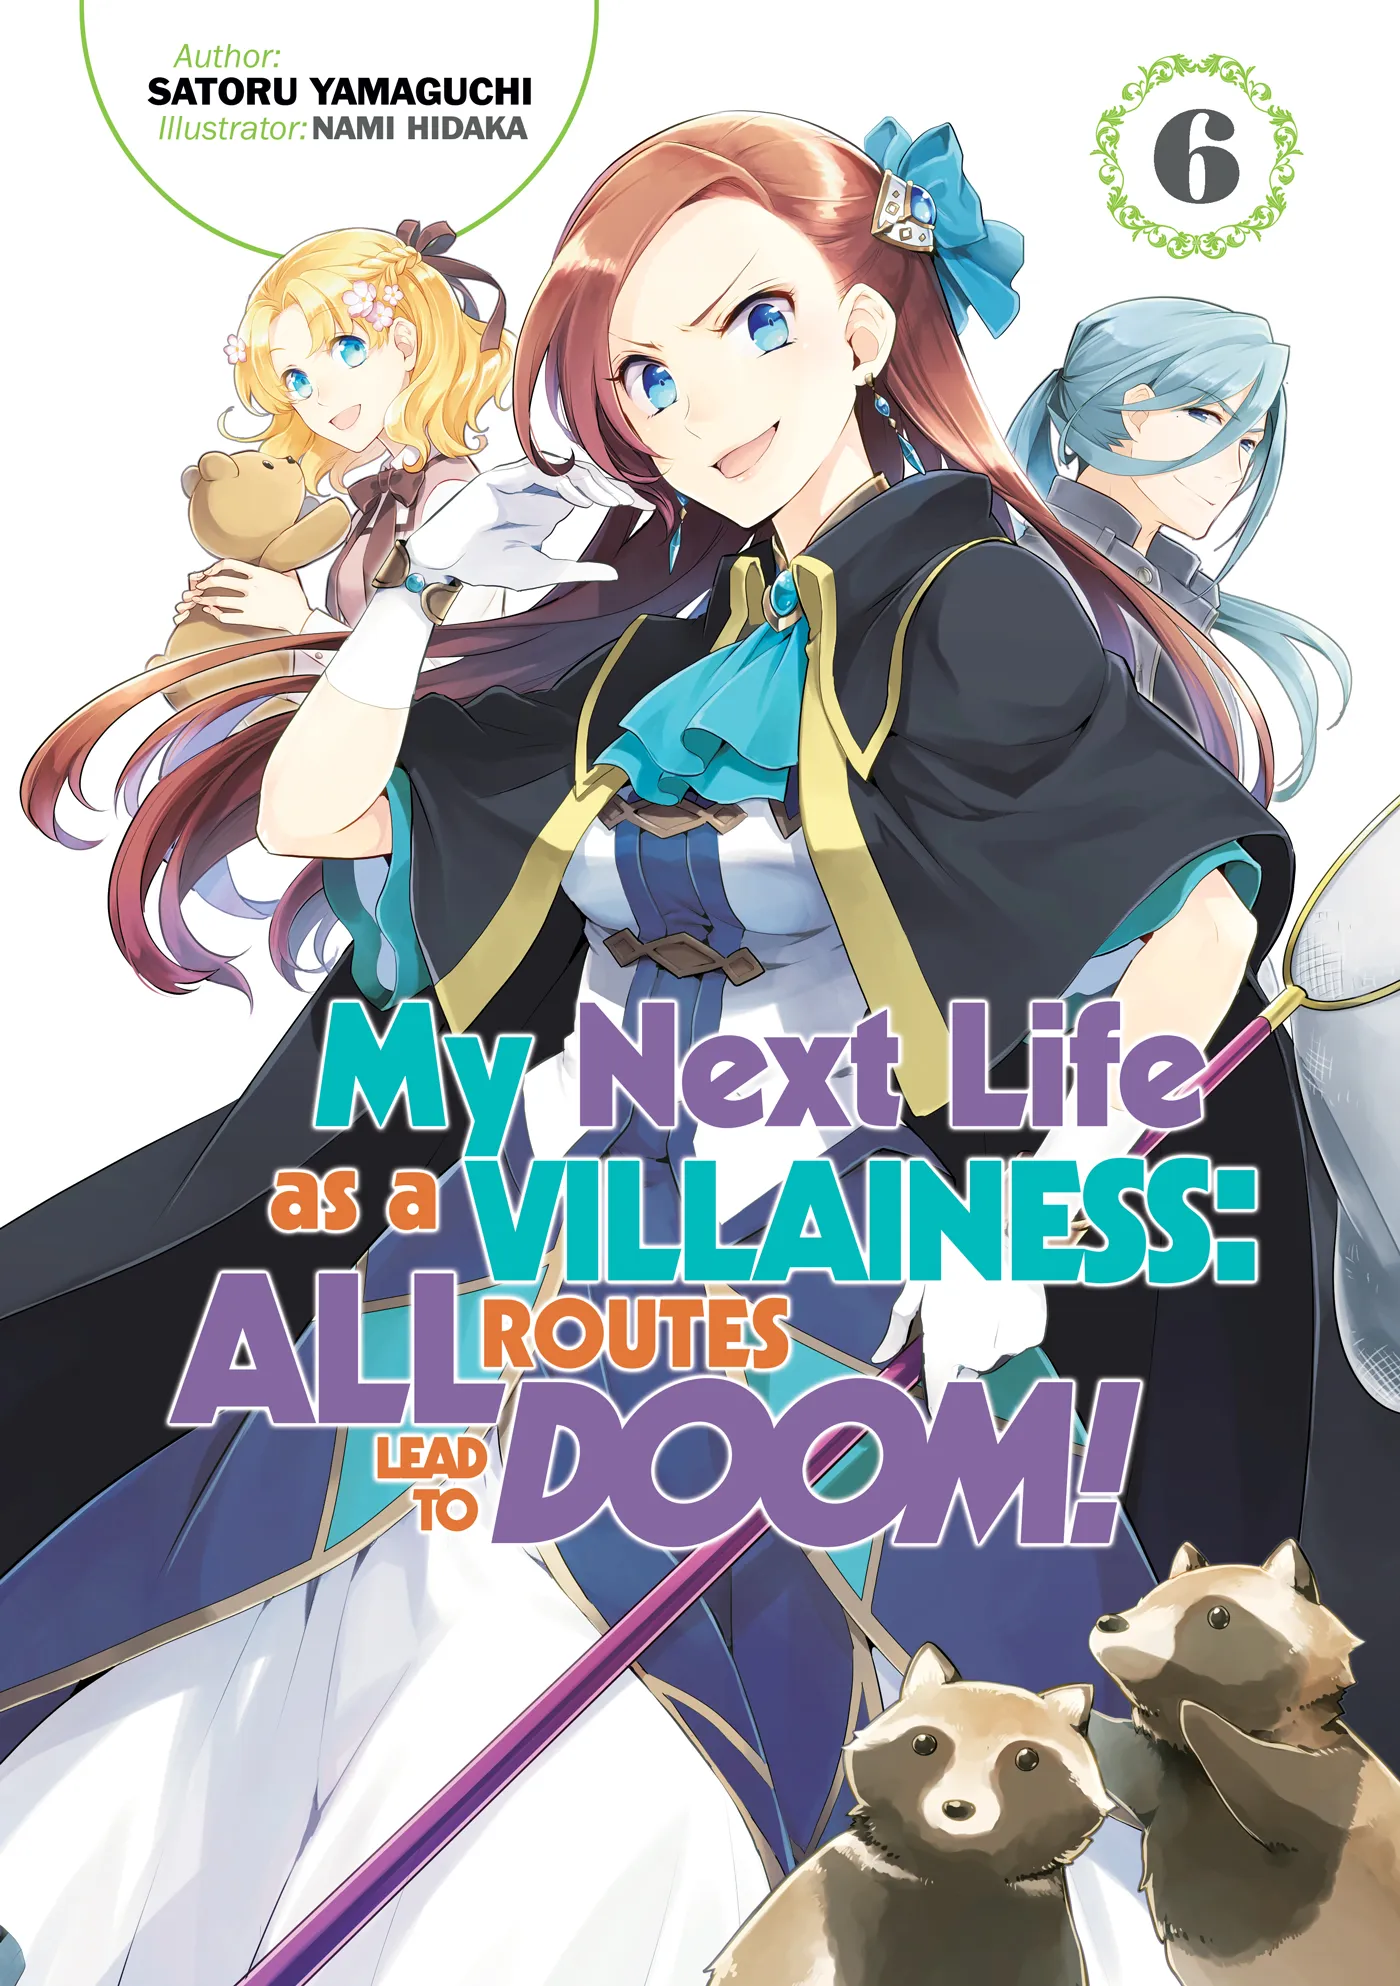 My Next Life as a Villainess: All Routes Lead to Doom! Volume 6 (My Next Life as a Villainess: All Routes Lead to Doom! #6)